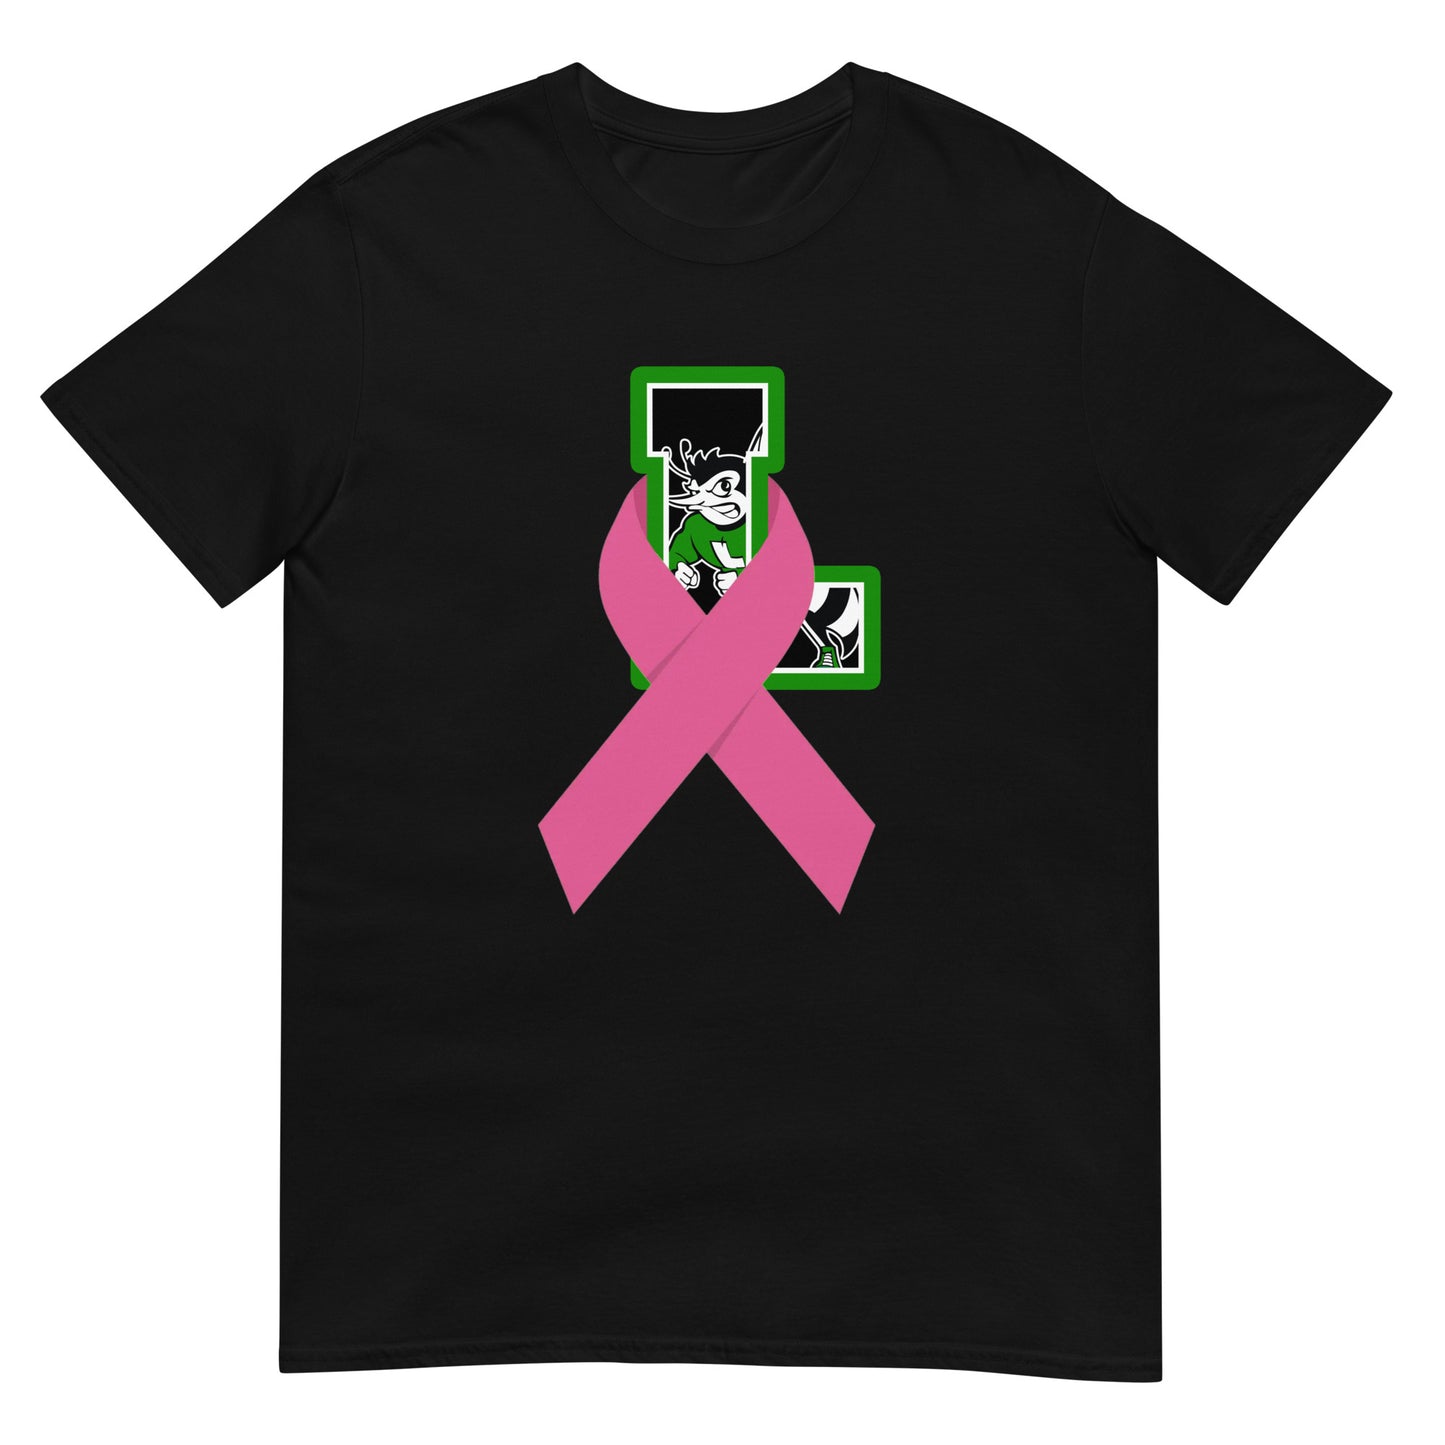 Lincoln Breast Cancer Short-Sleeve Unisex T-Shirt